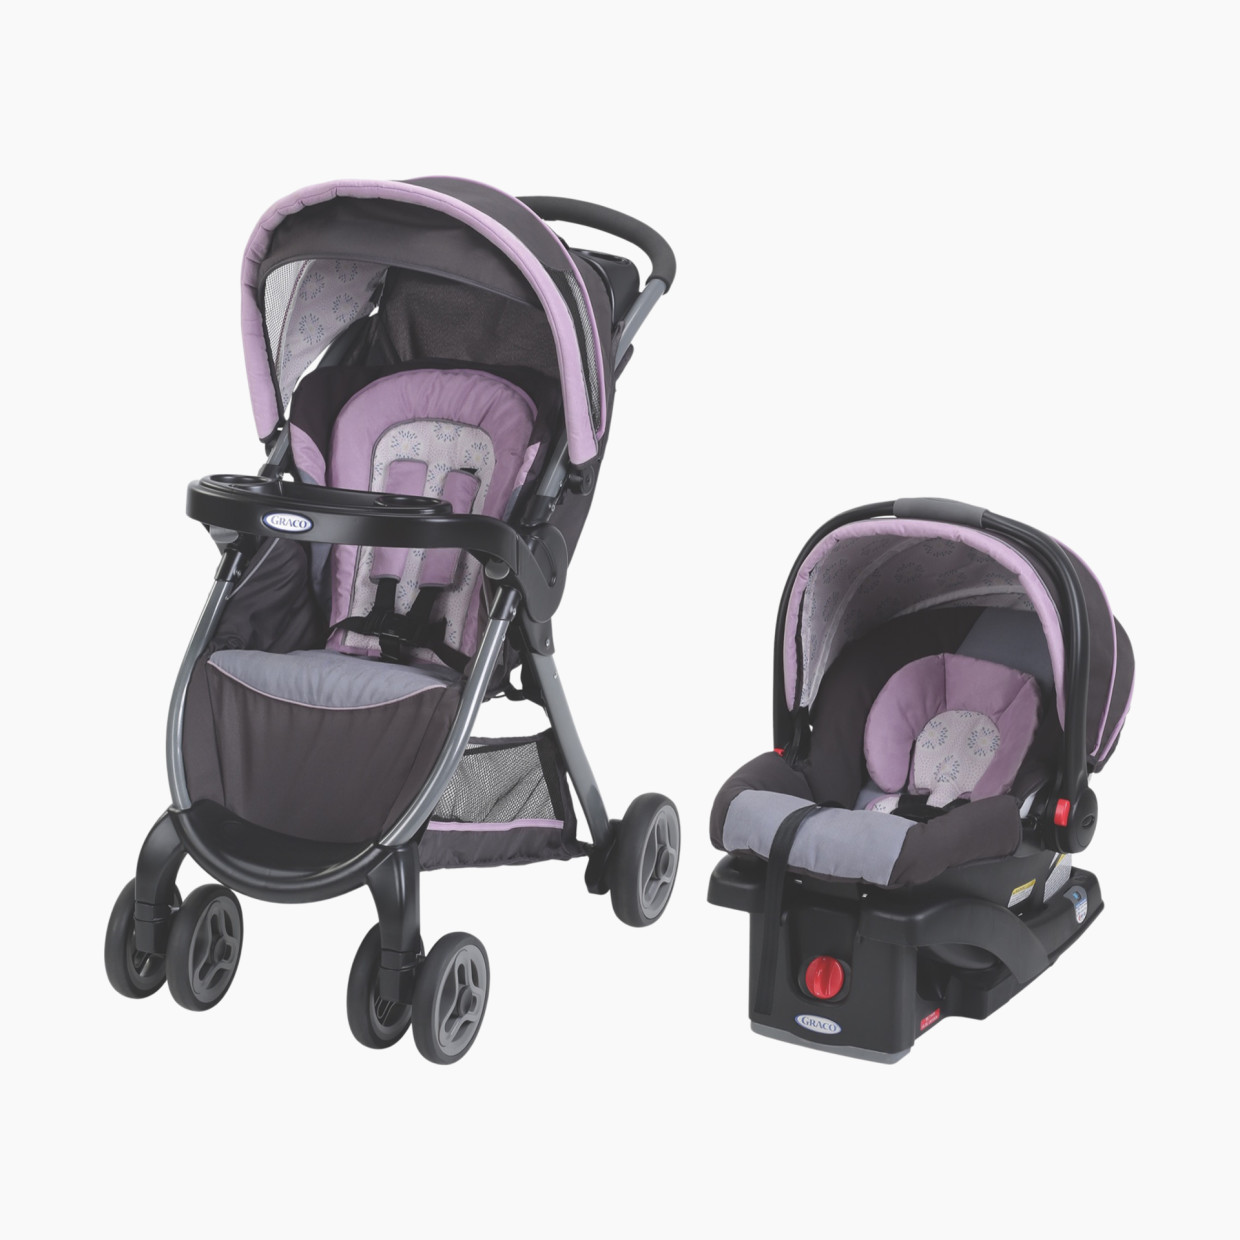 Graco FastAction Fold Click Connect Travel System - Janey.